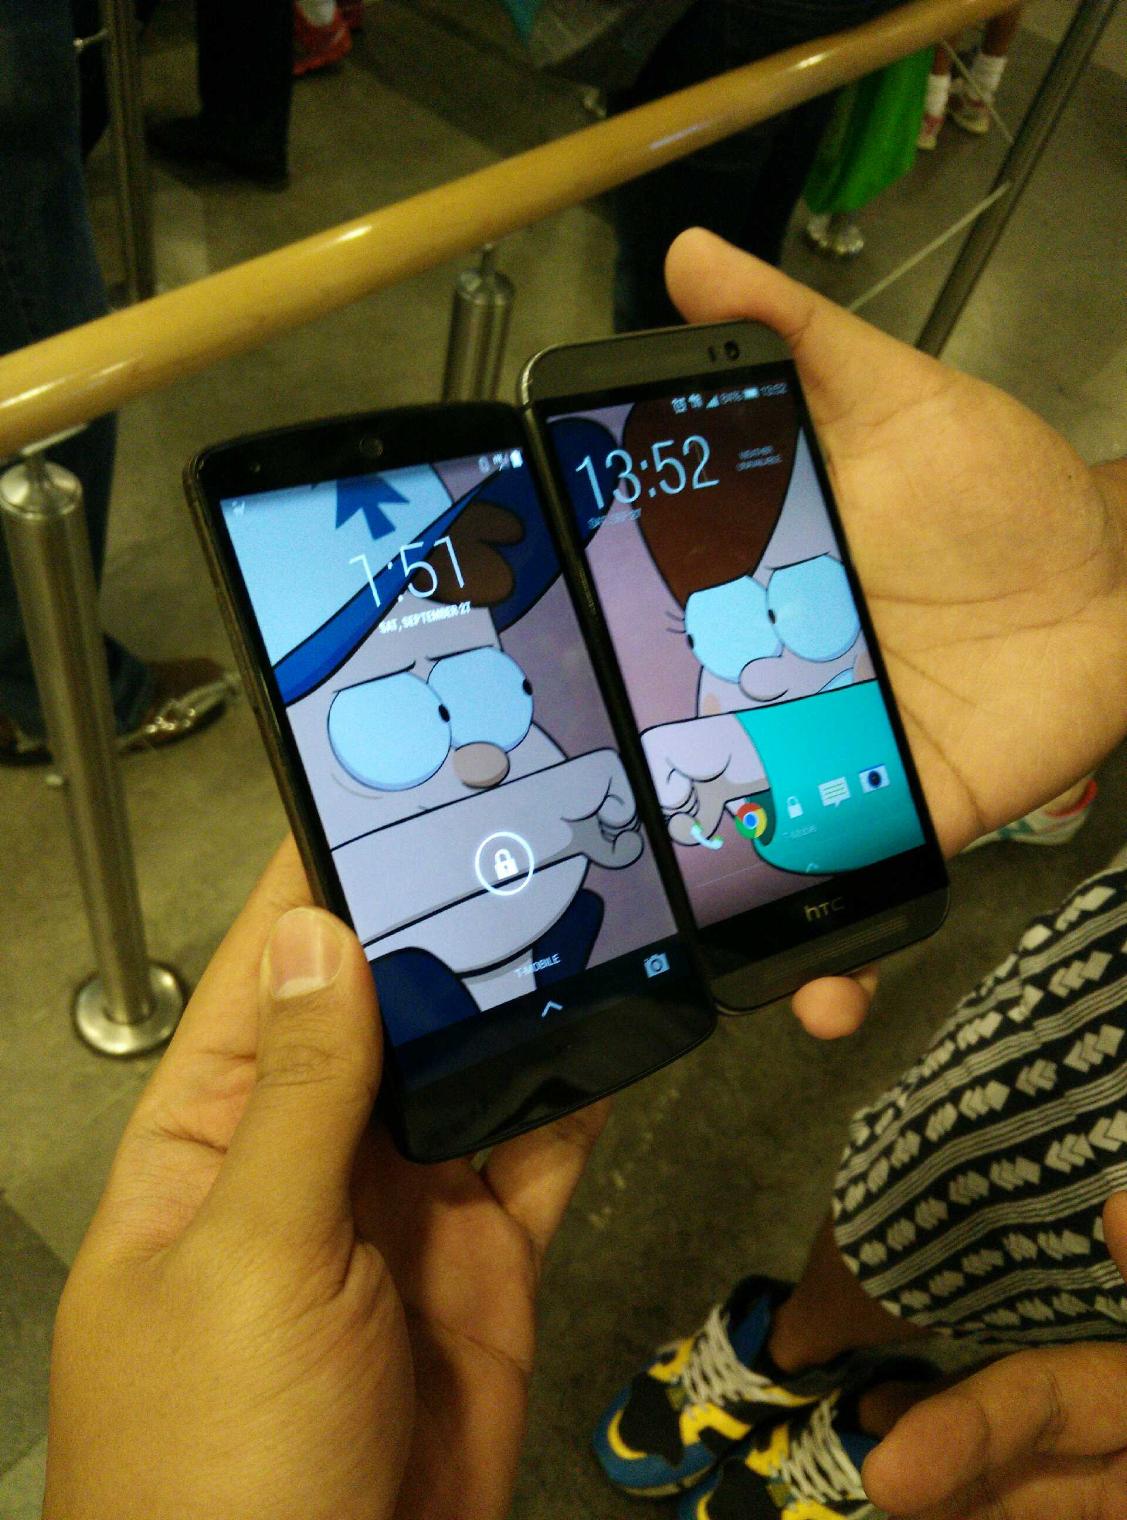 Me And My Friend Have Awesome Matching Phone Wallpaper Gravityfalls